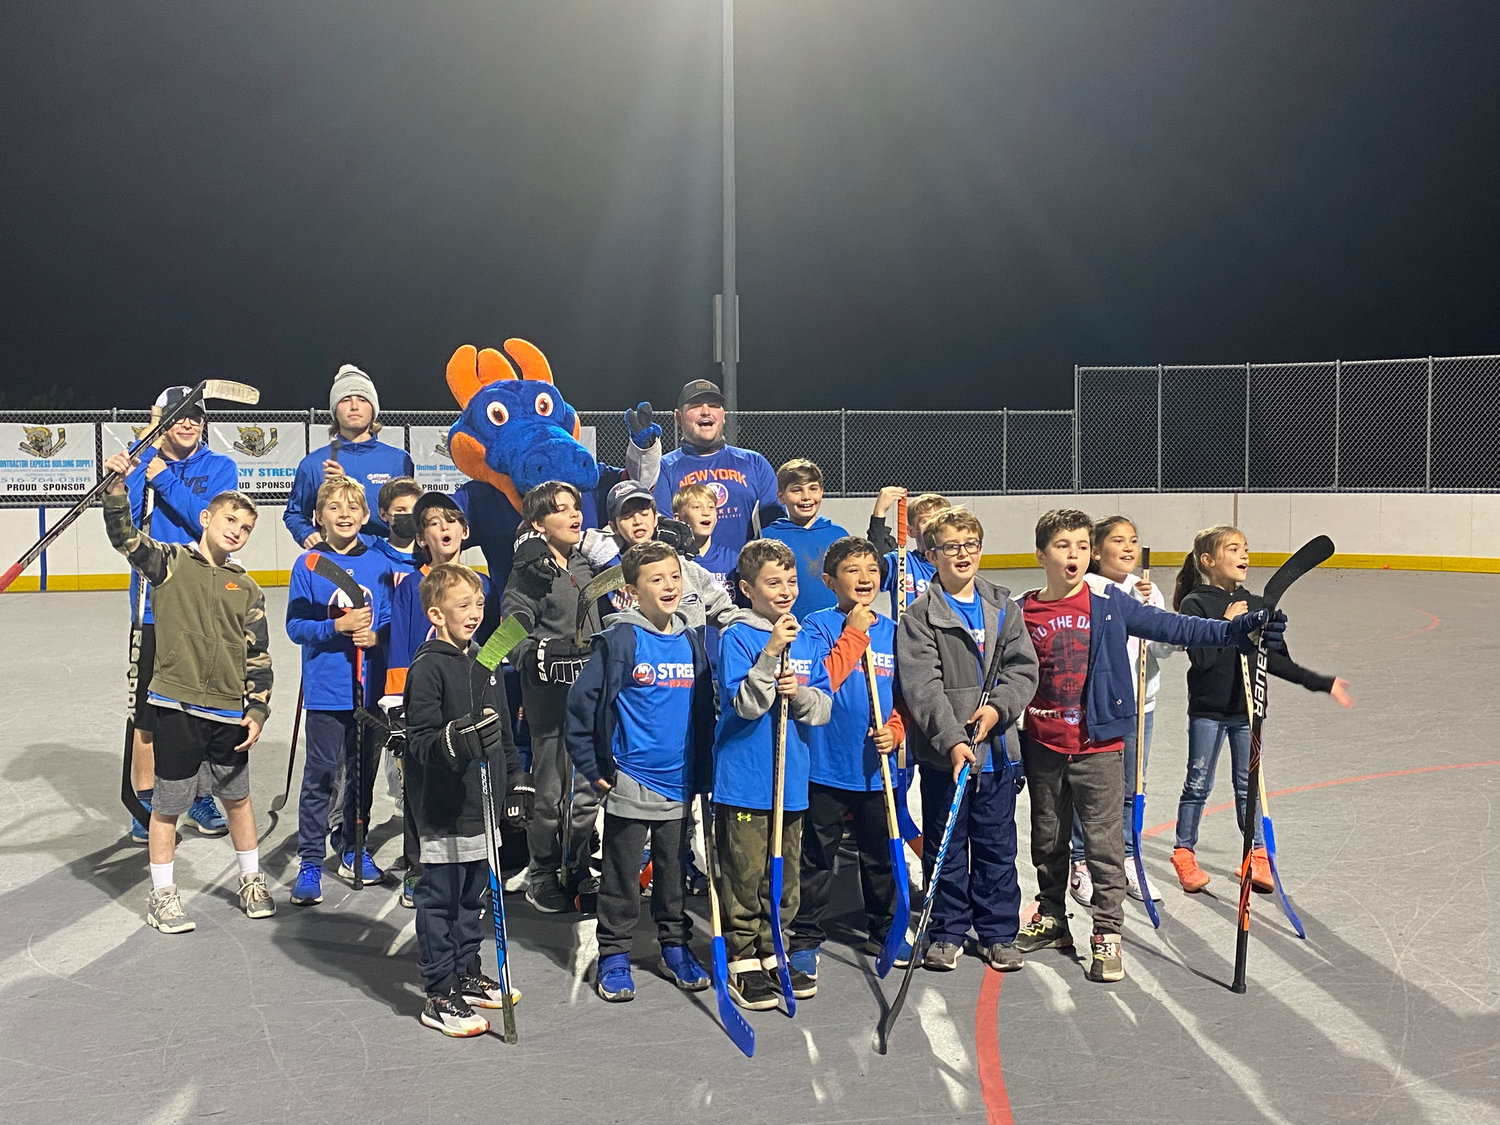 The kids celebrate their last session of street hockey lessons at Oceanside Park with New York Islanders staff and Sparky the Dragon.